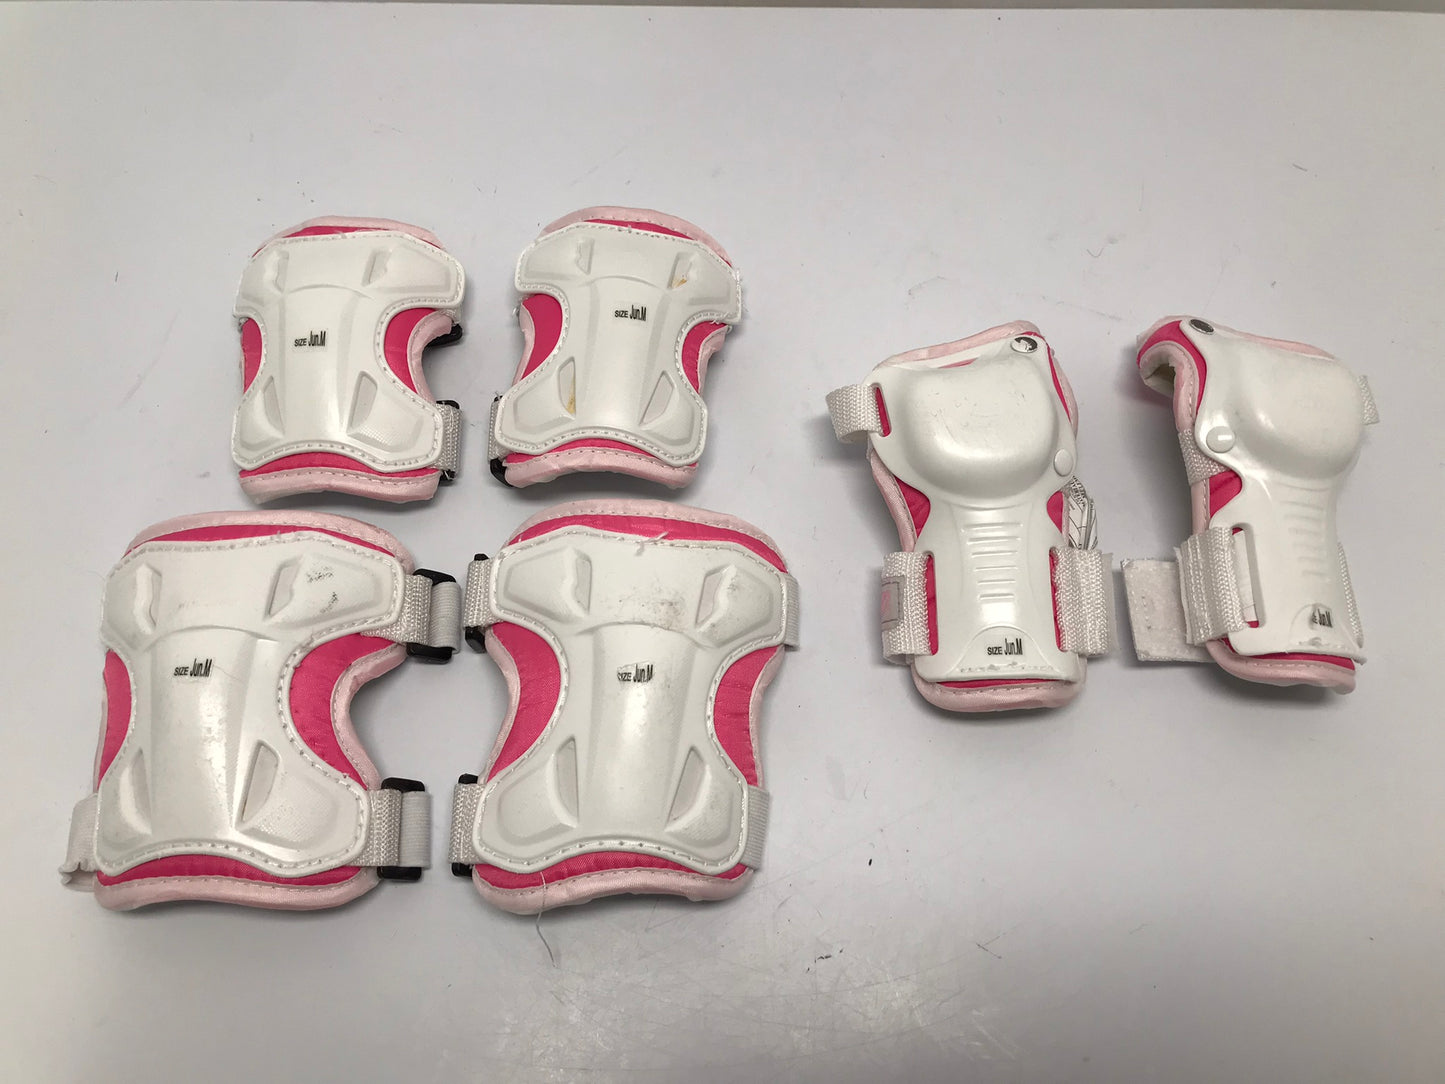 Inline Roller Skates Protective Knee Wrist Elbow Pads Child Size 6-8 FireFly White Pink As New